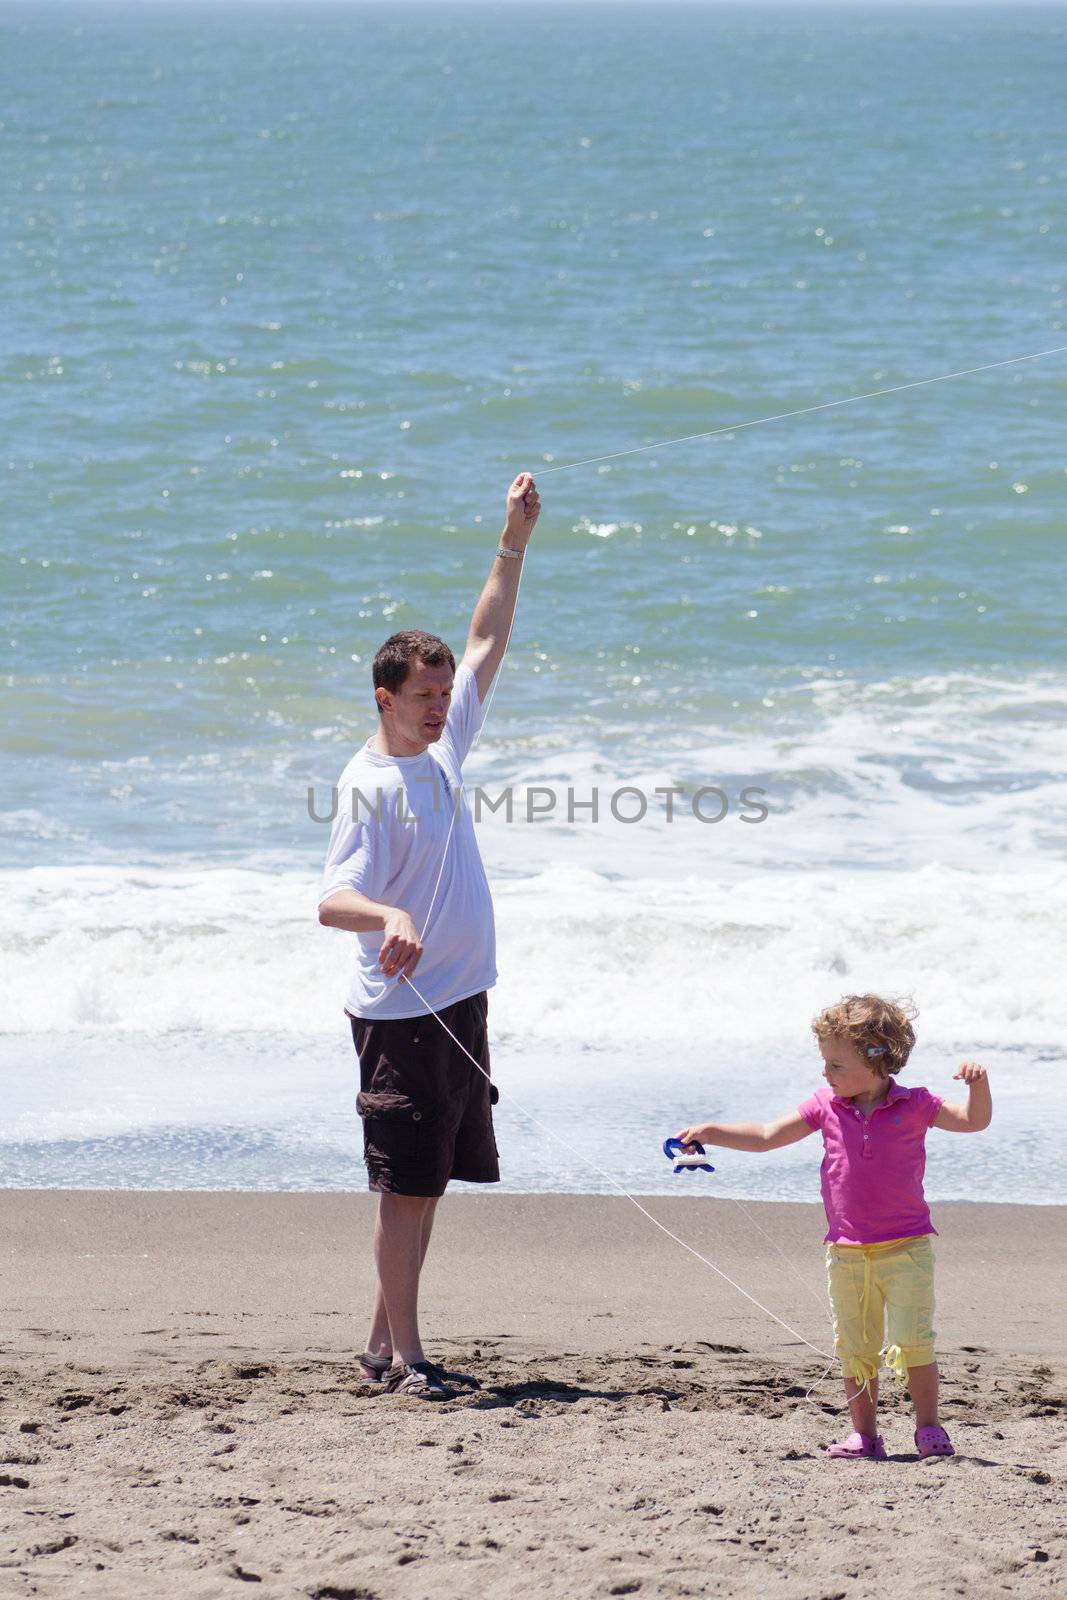 Father and daughter flying kite on the beach on sunny day.